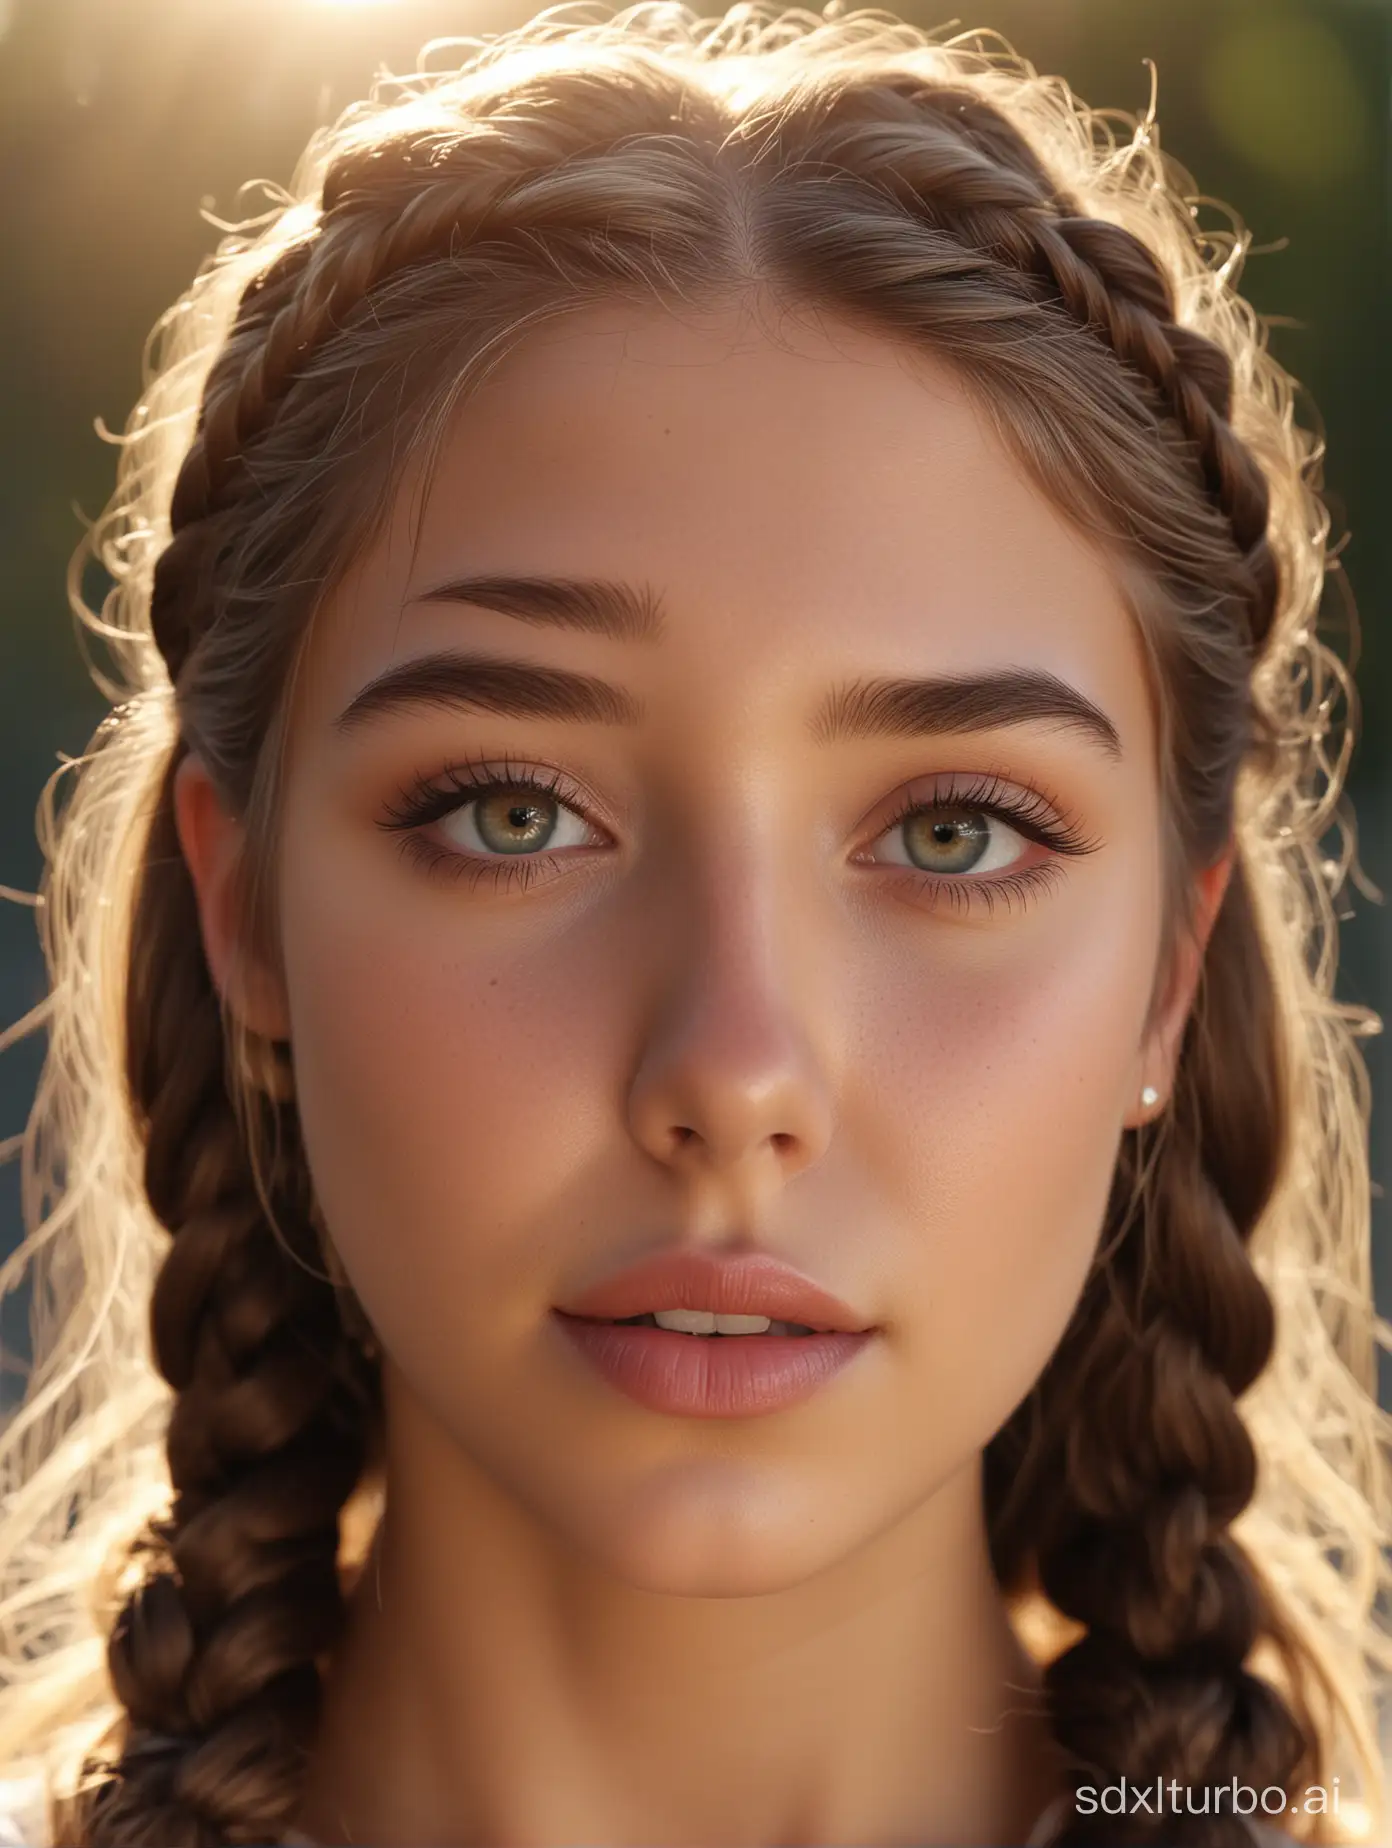 Stunning-Teen-Girl-Portrait-in-4K-Realistic-Detail-with-Sunlit-Radiance